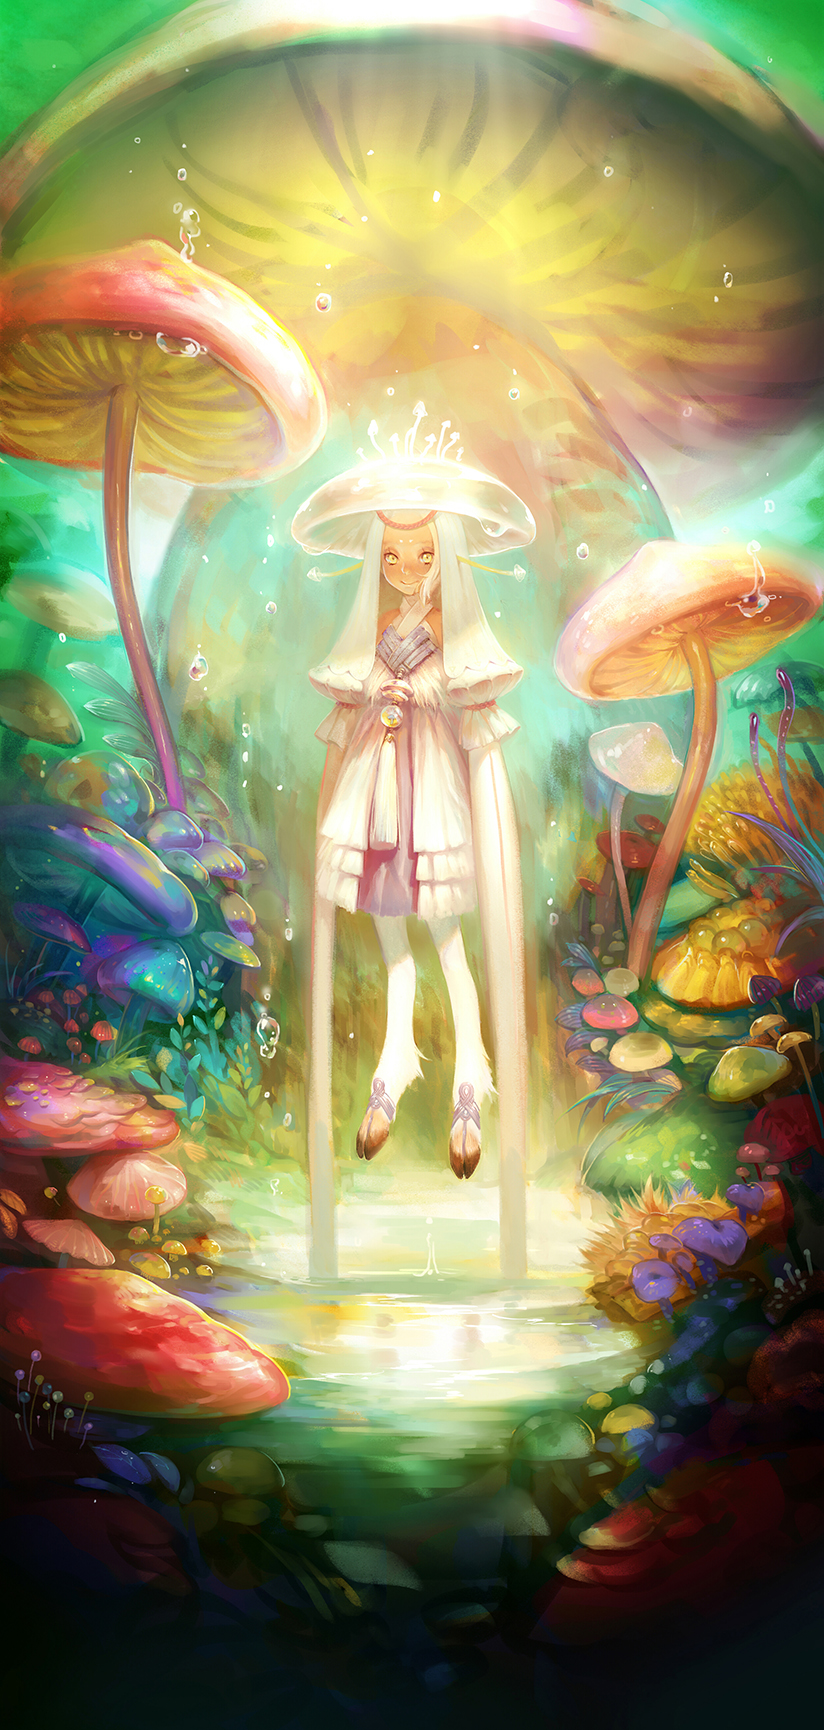 1girl aimeeee17 closed_mouth commentary_request coral dress dripping floating forest grass halter_dress hat highres hooves lake looking_at_viewer monster_girl mushroom nature pixiv_fantasia pixiv_fantasia_new_world puffy_short_sleeves puffy_sleeves satyr short_sleeves smile solo sphere tassel veil water_drop white_dress white_hair white_headwear